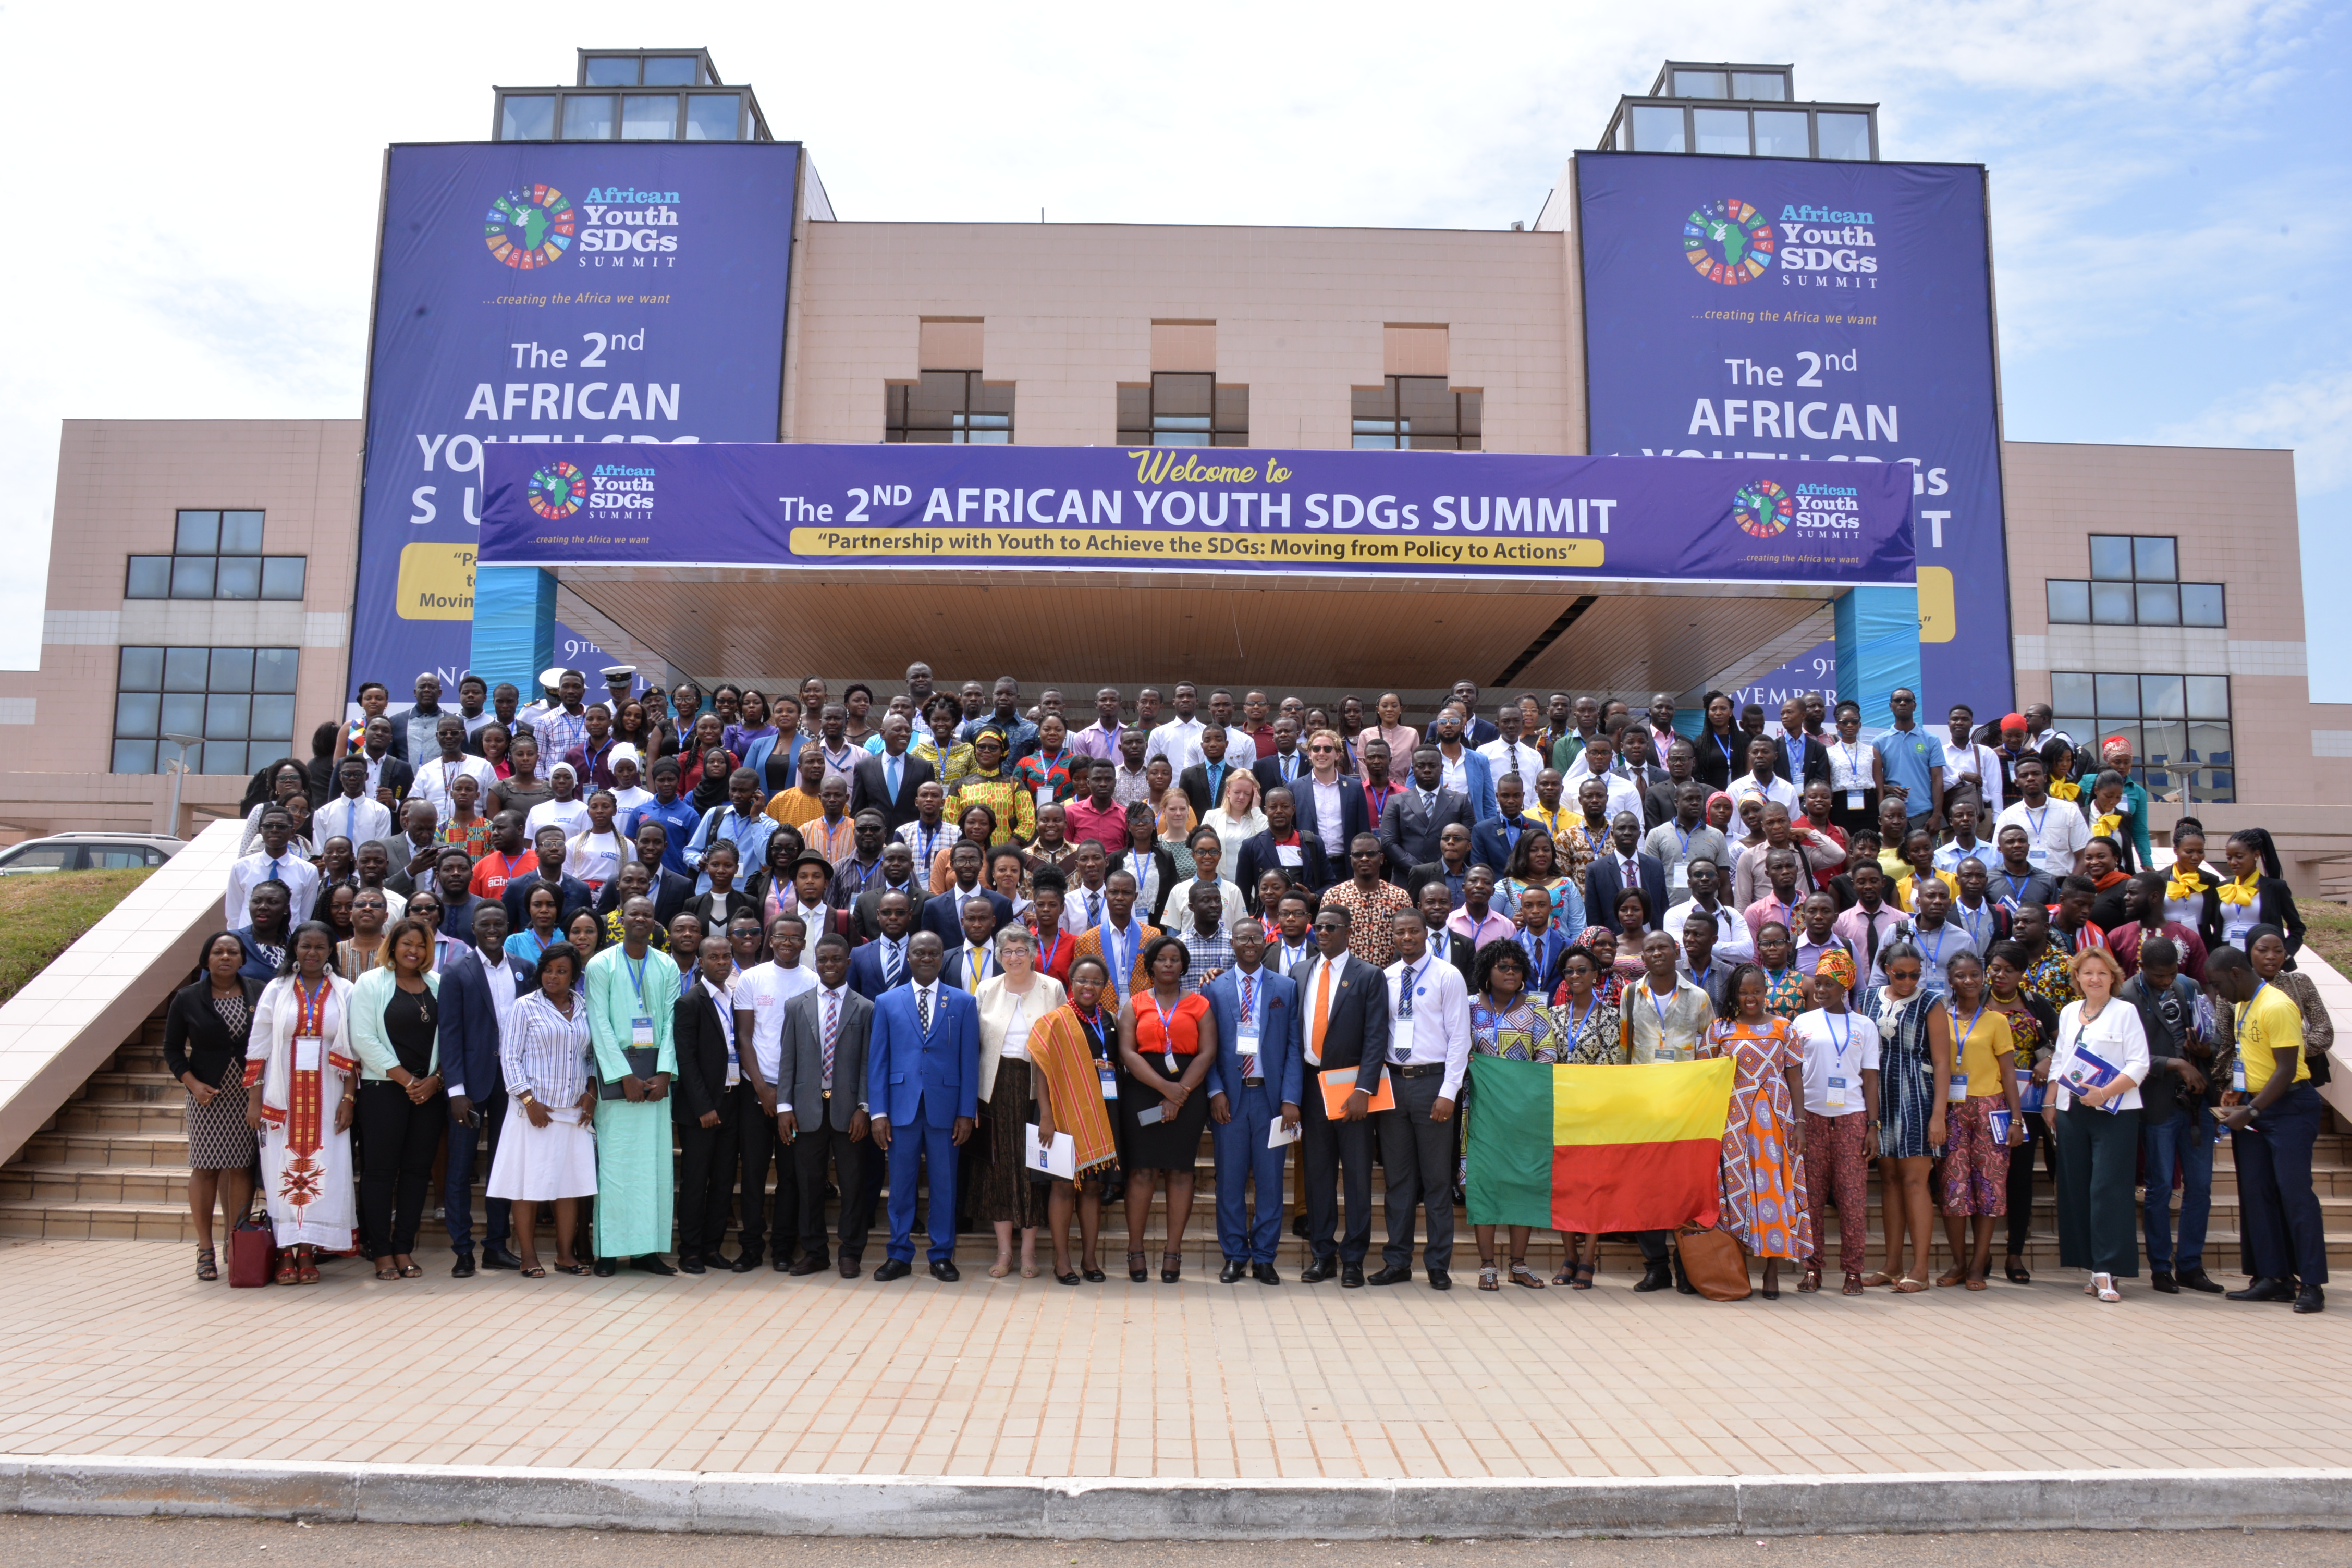 Youth Declaration:2nd African Youth SDGs Summit